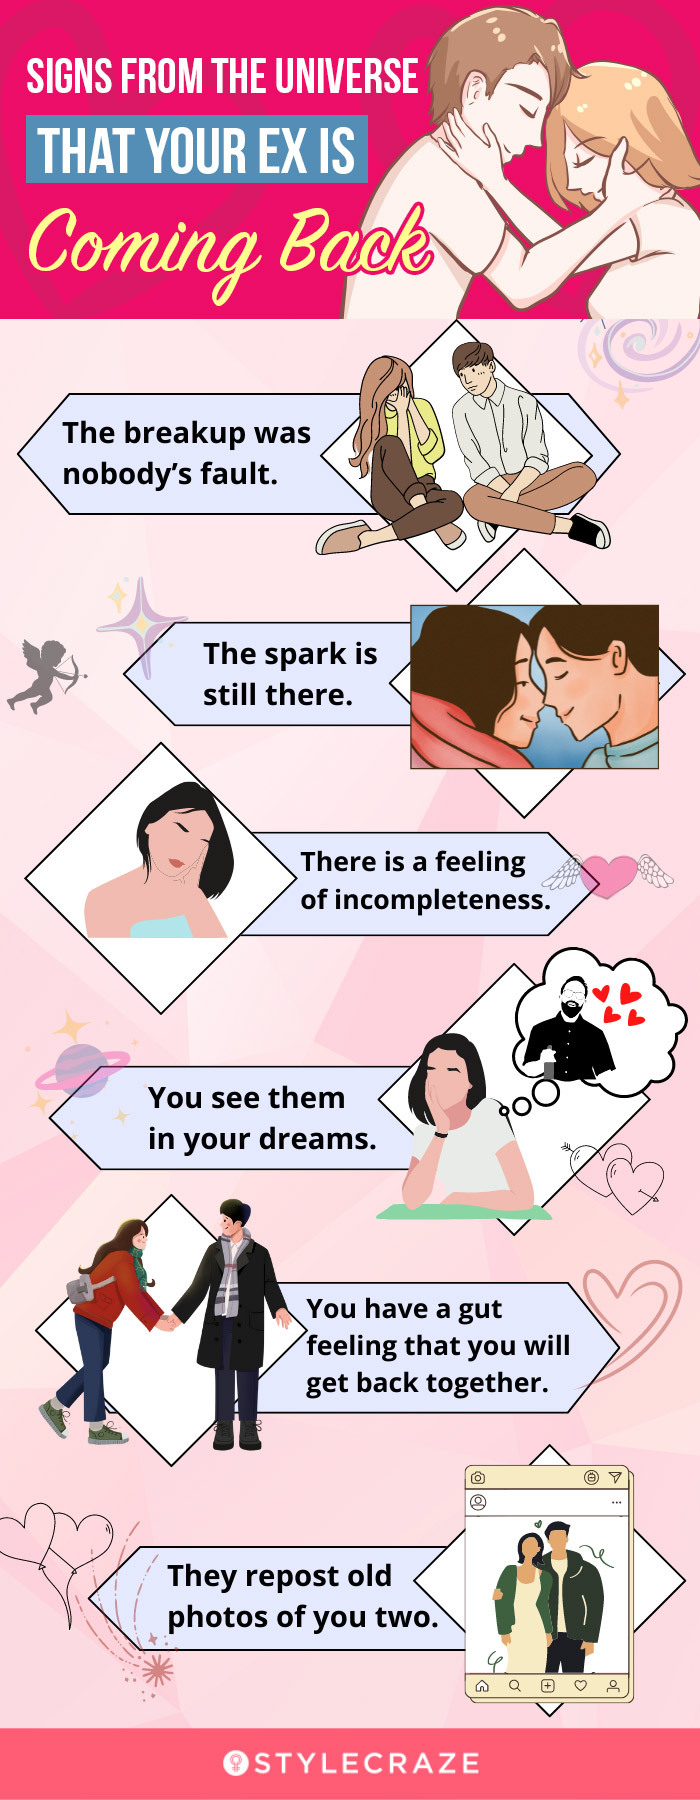 signs from the universe that your ex is coming back (infographic)